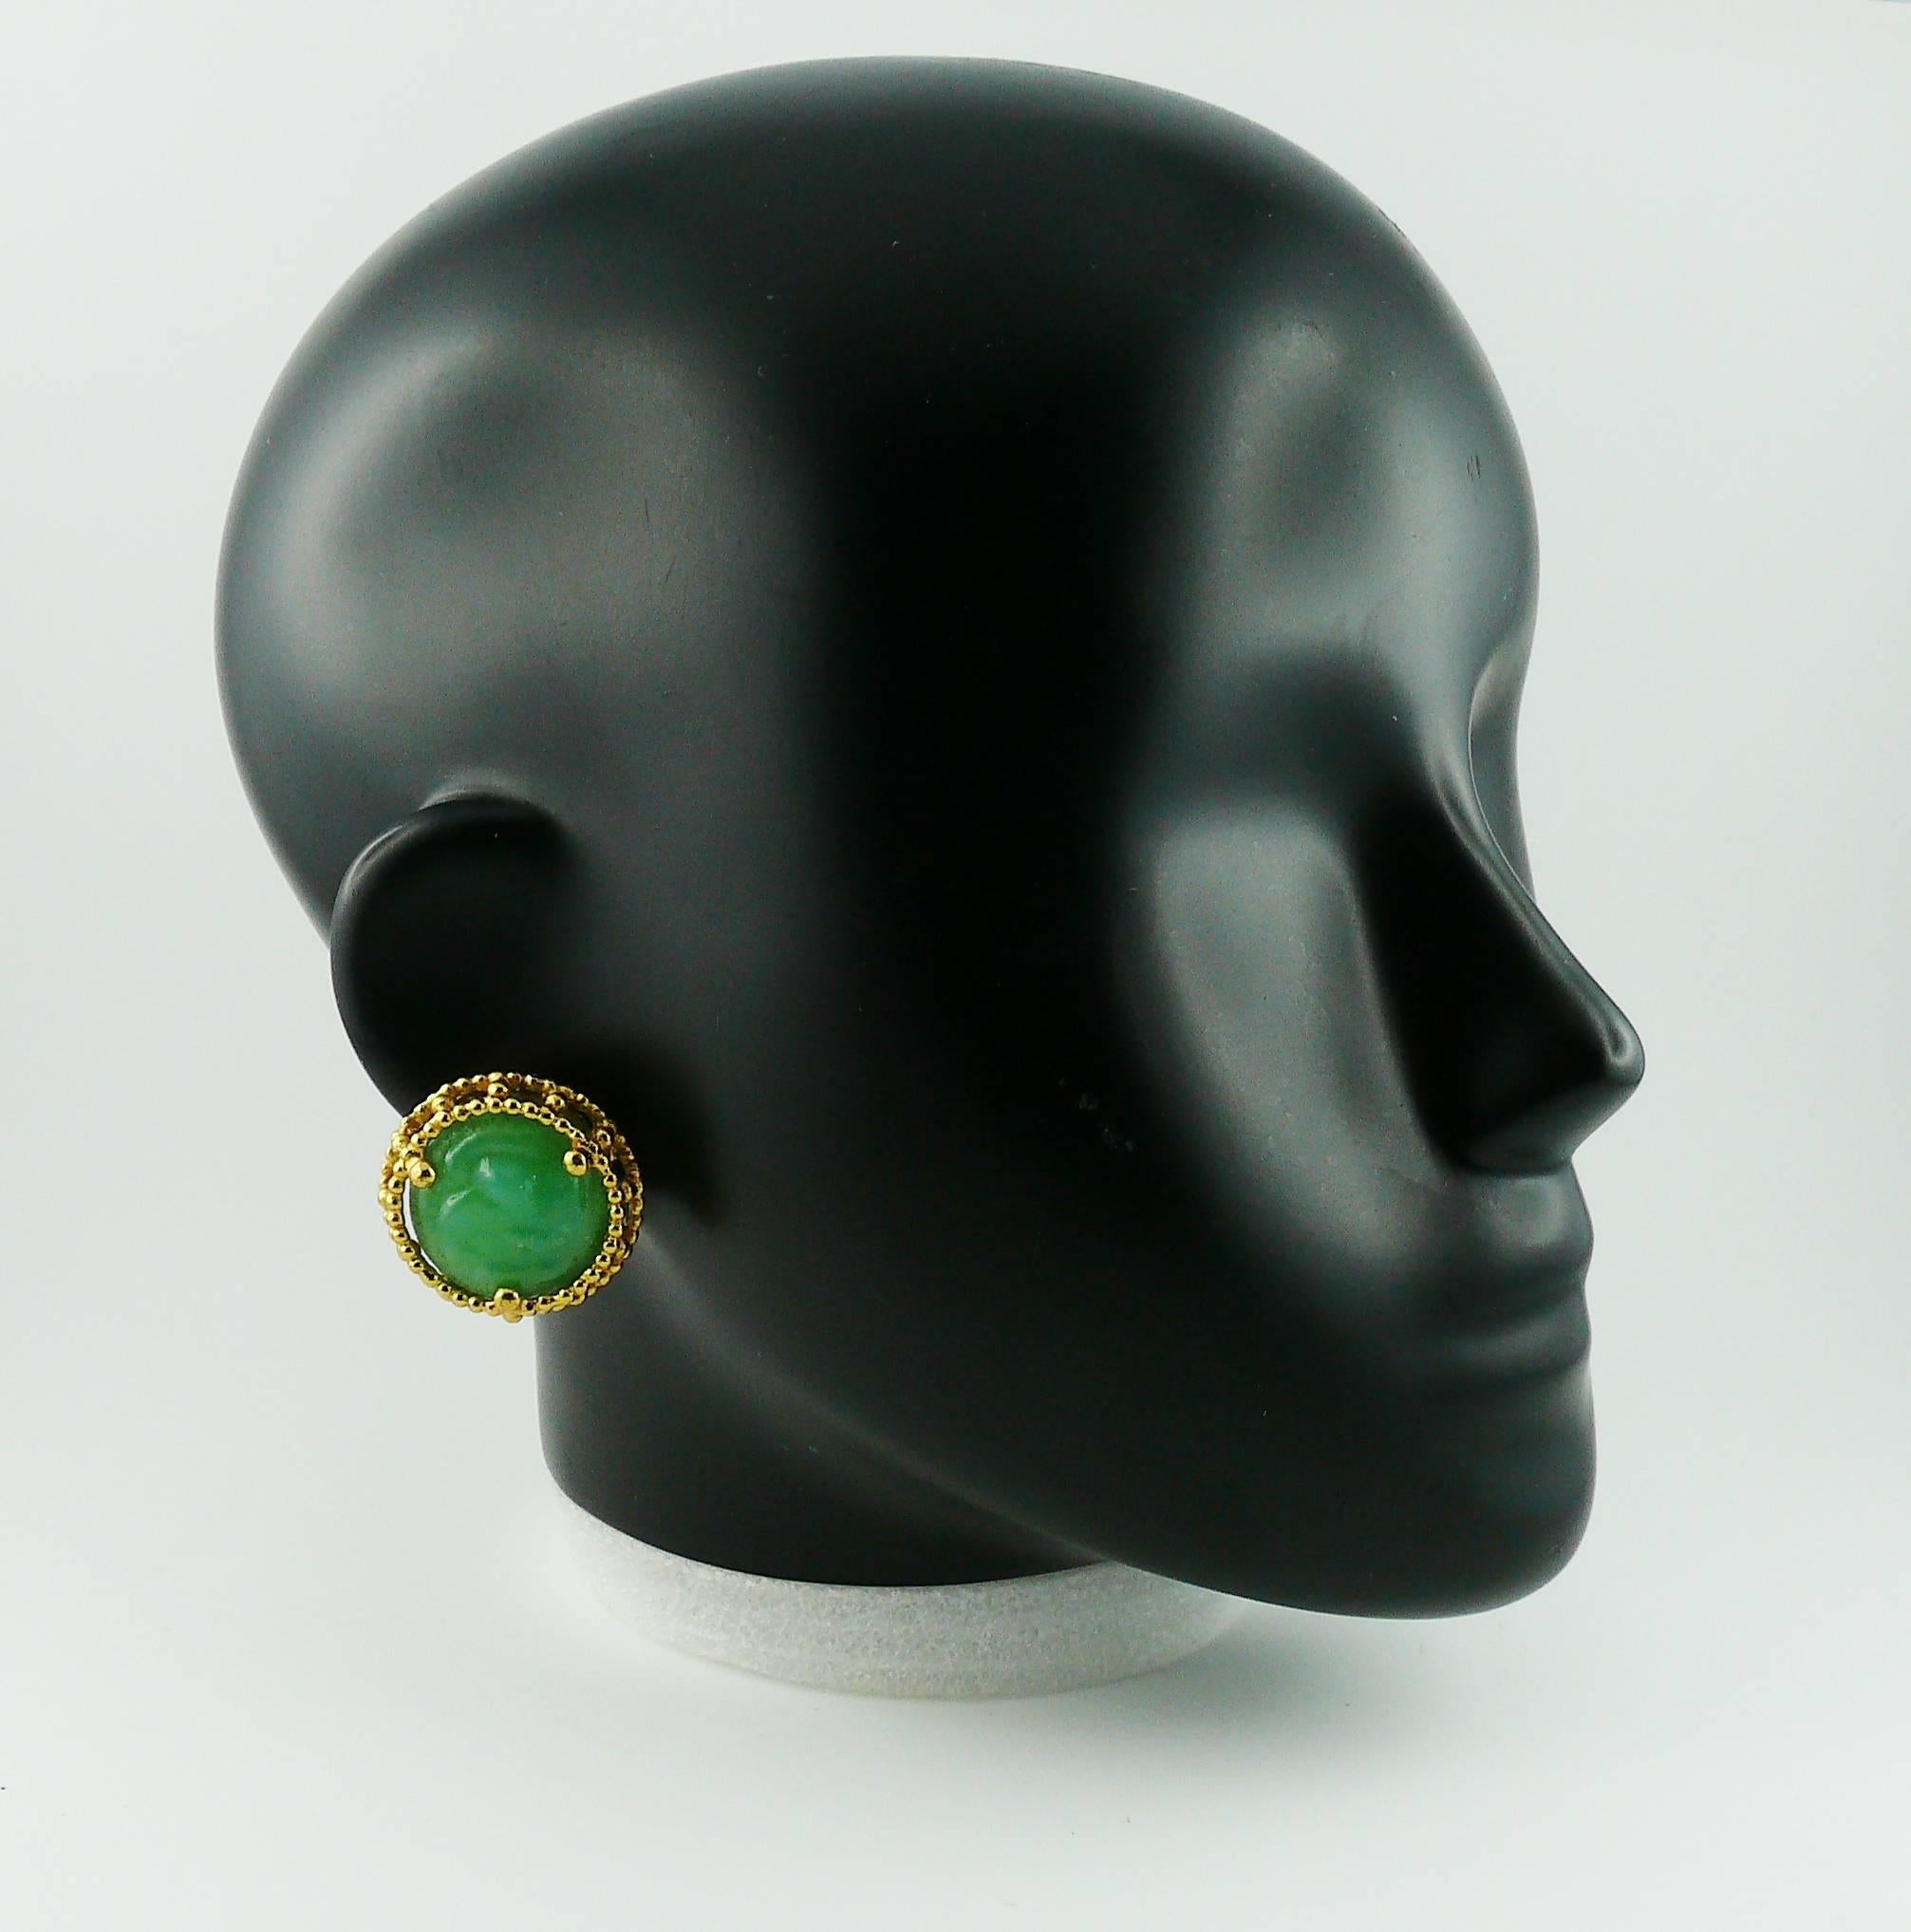 YVES SAINT LAURENT vintage clip-on earrings featuring faux jade resin cabochon in a gold toned setting.

Embossed YSL Made in France.

Indicative measurements : diameter approx. 3.1 cm (1.22 inches).

JEWELRY CONDITION CHART
- New or never worn :